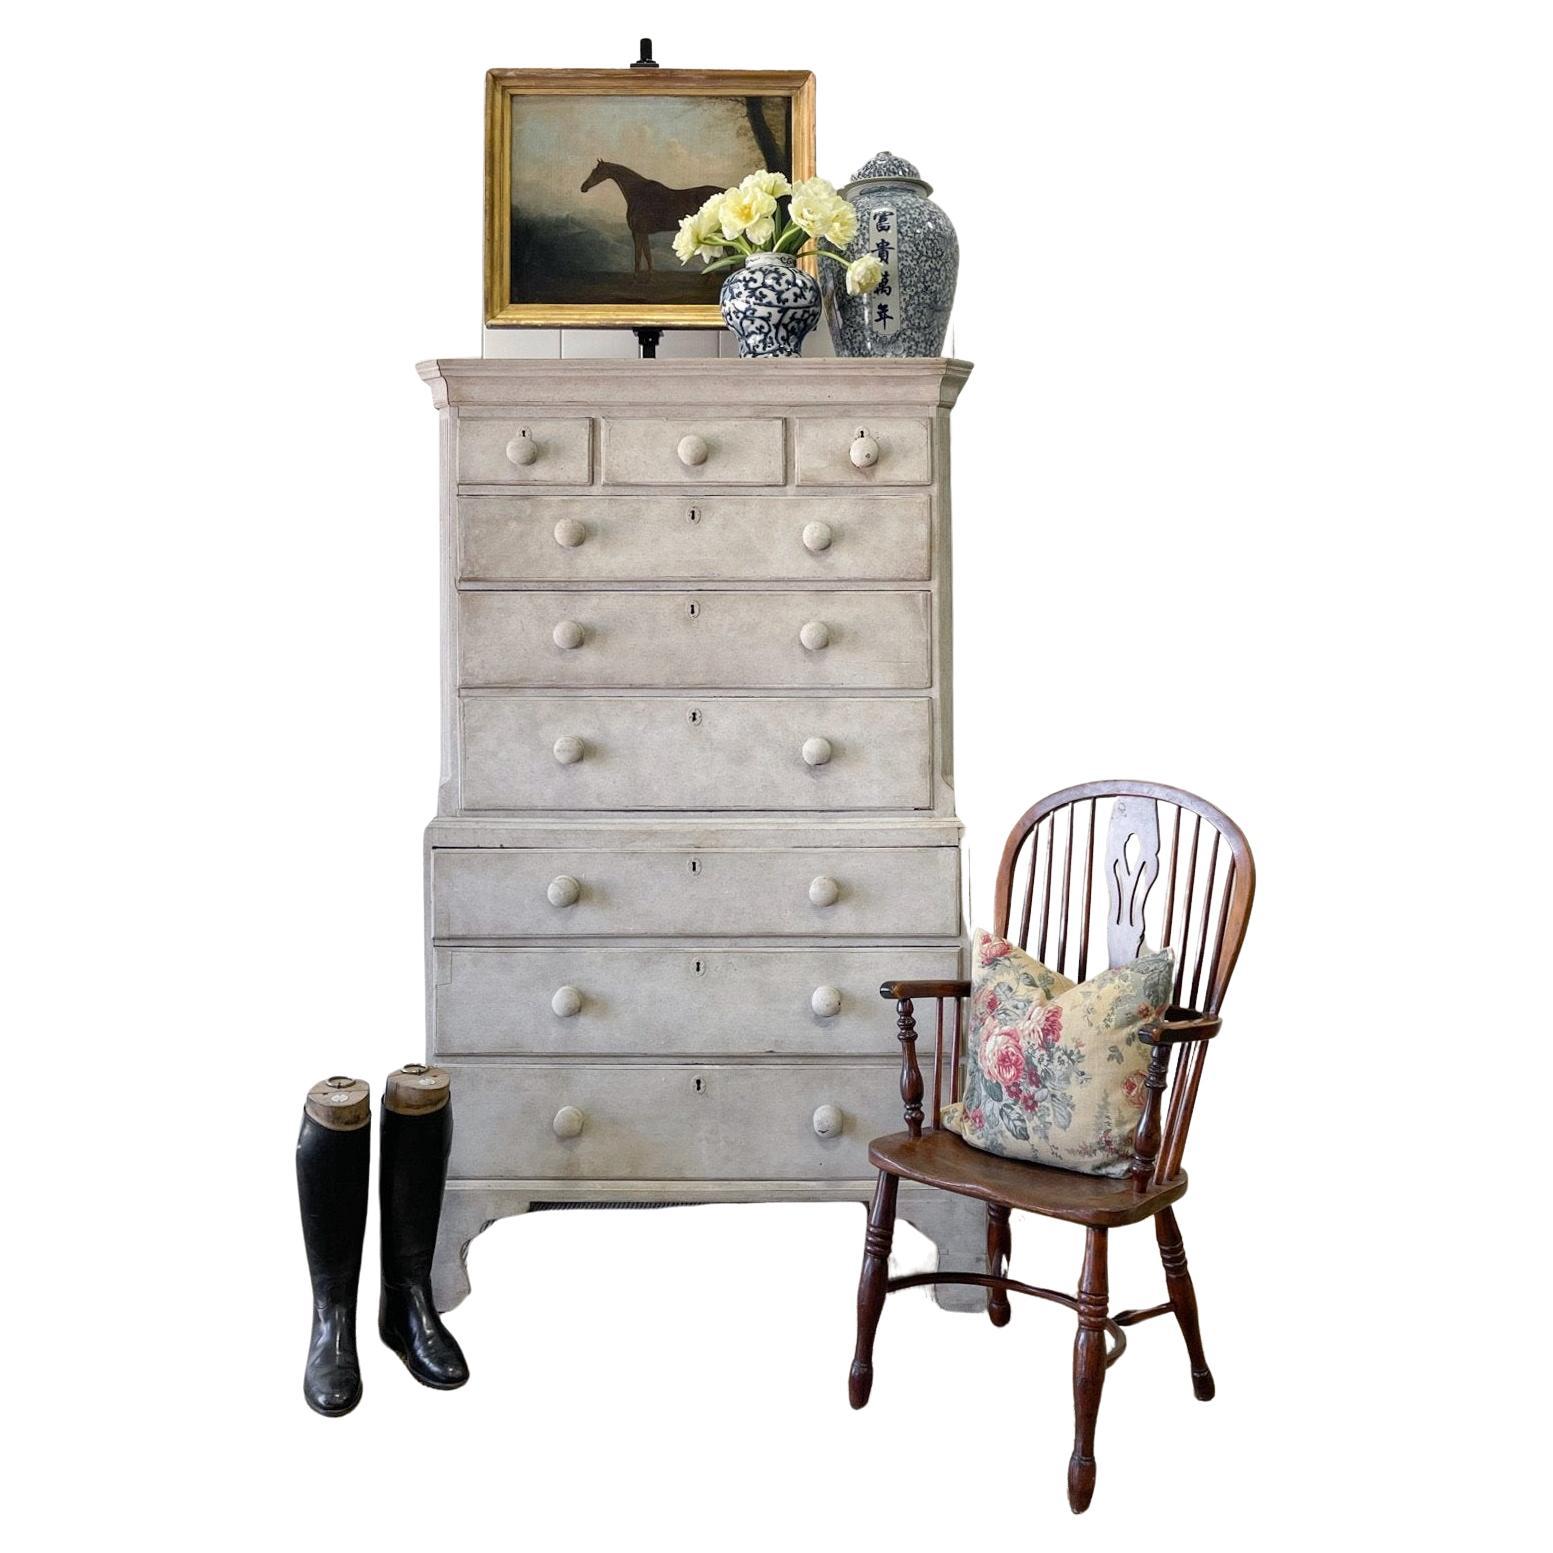 A large, beautiful and fine English country 18th century painted mahogany highboy. Displaying a stately row of knobs and graceful bracket feet that are a bit taller than average, giving a finer overall look. Chamfered and reeded corners and